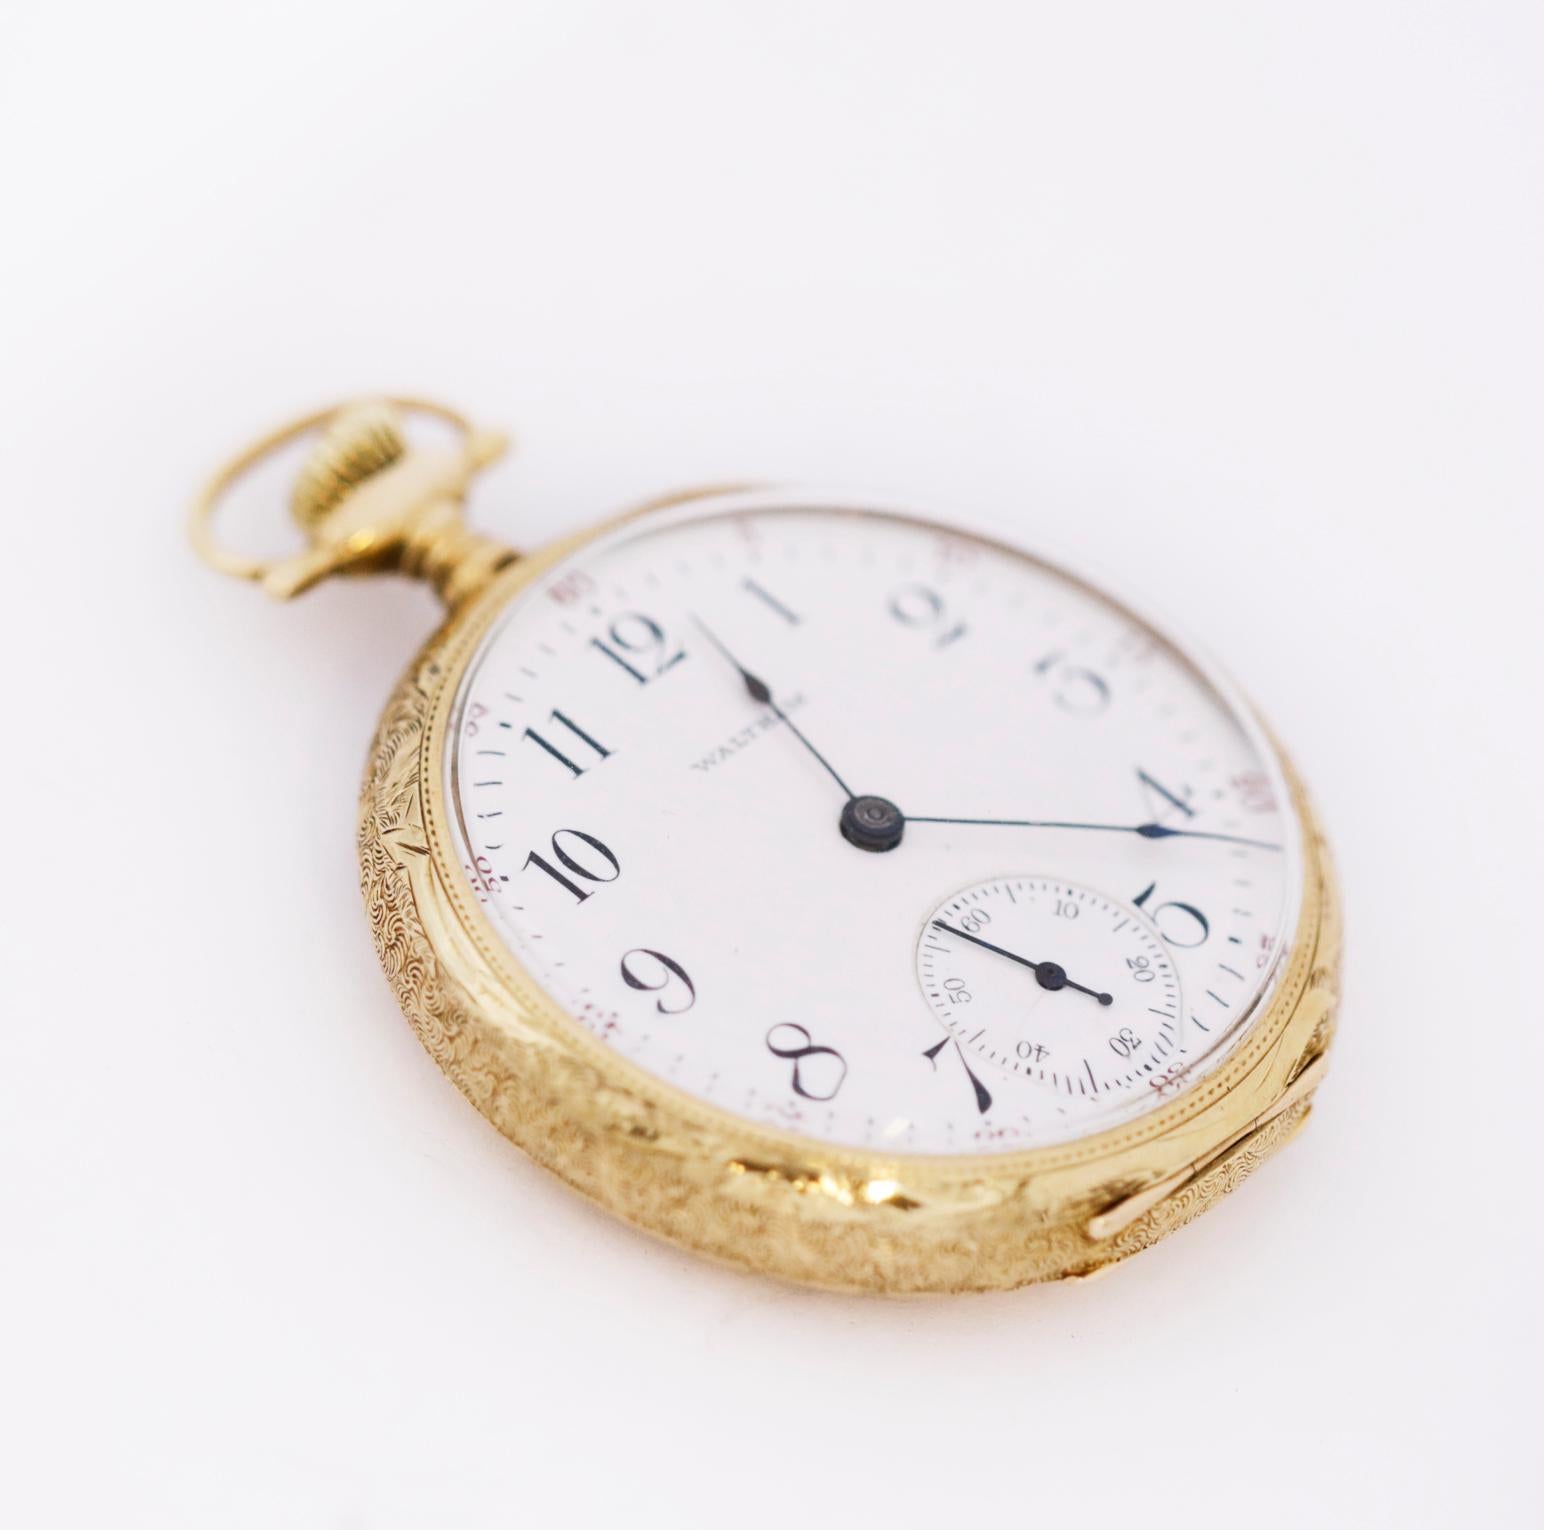 Beautiful Antique Waltham Pocket Watch
14k Yellow Gold Case 
Intricate Flower Design on Case 
White Dial 
Dark Cobalt Blue Hands 
Dedicated Second Sub-Dial 
Black Arabic Numerals 
Manual Winding Movement 
Grade No. 620
Size 16S
15 jewels 
Church